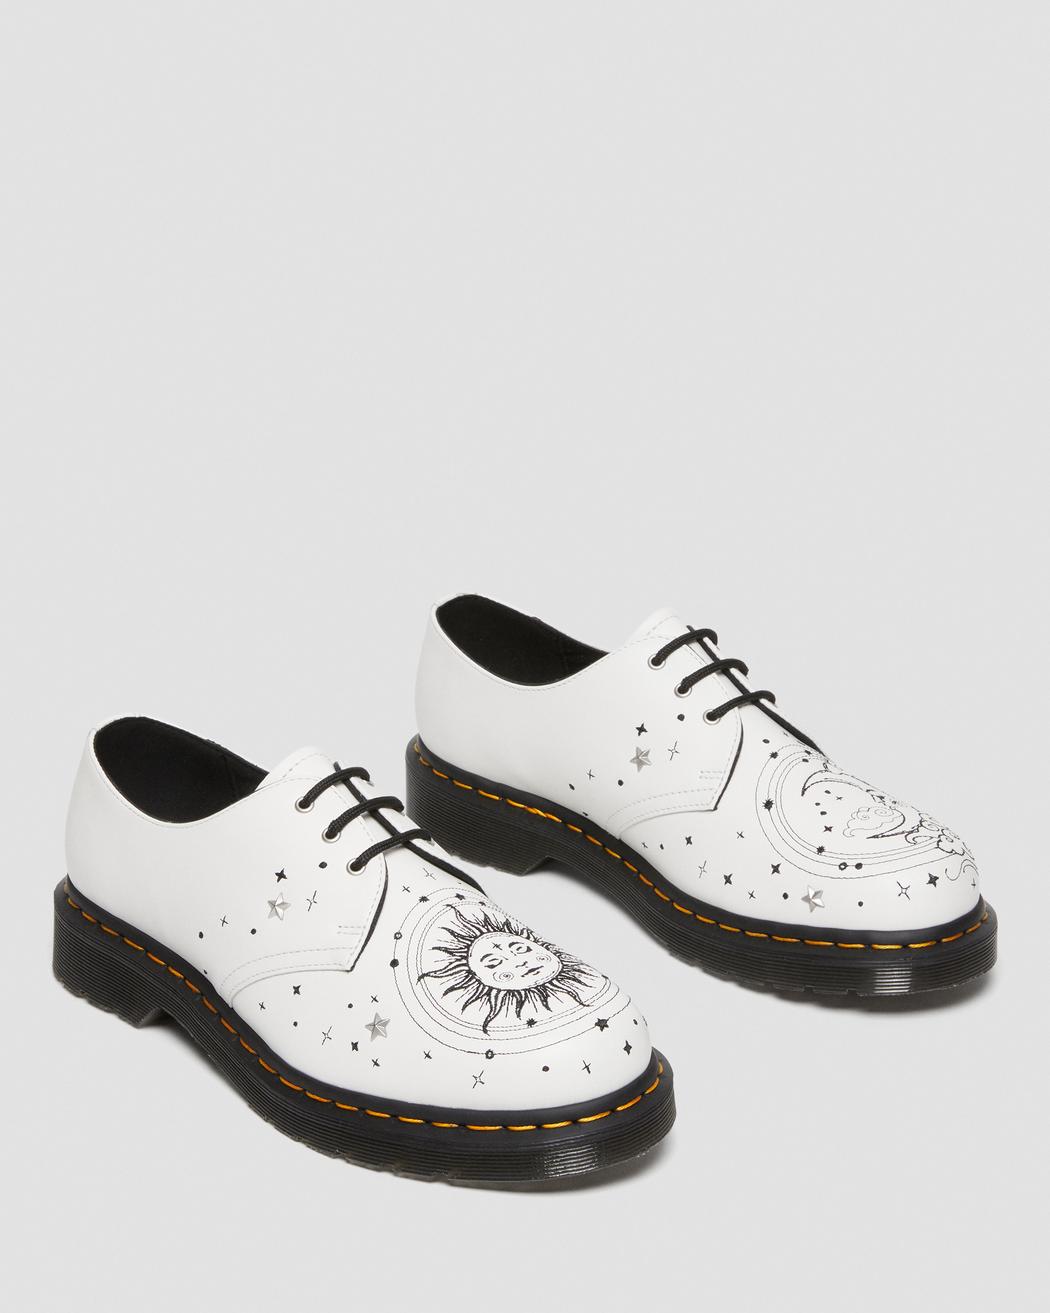 1461 Cosmic Embroidered Leather Oxford Shoes | Dr. Martens